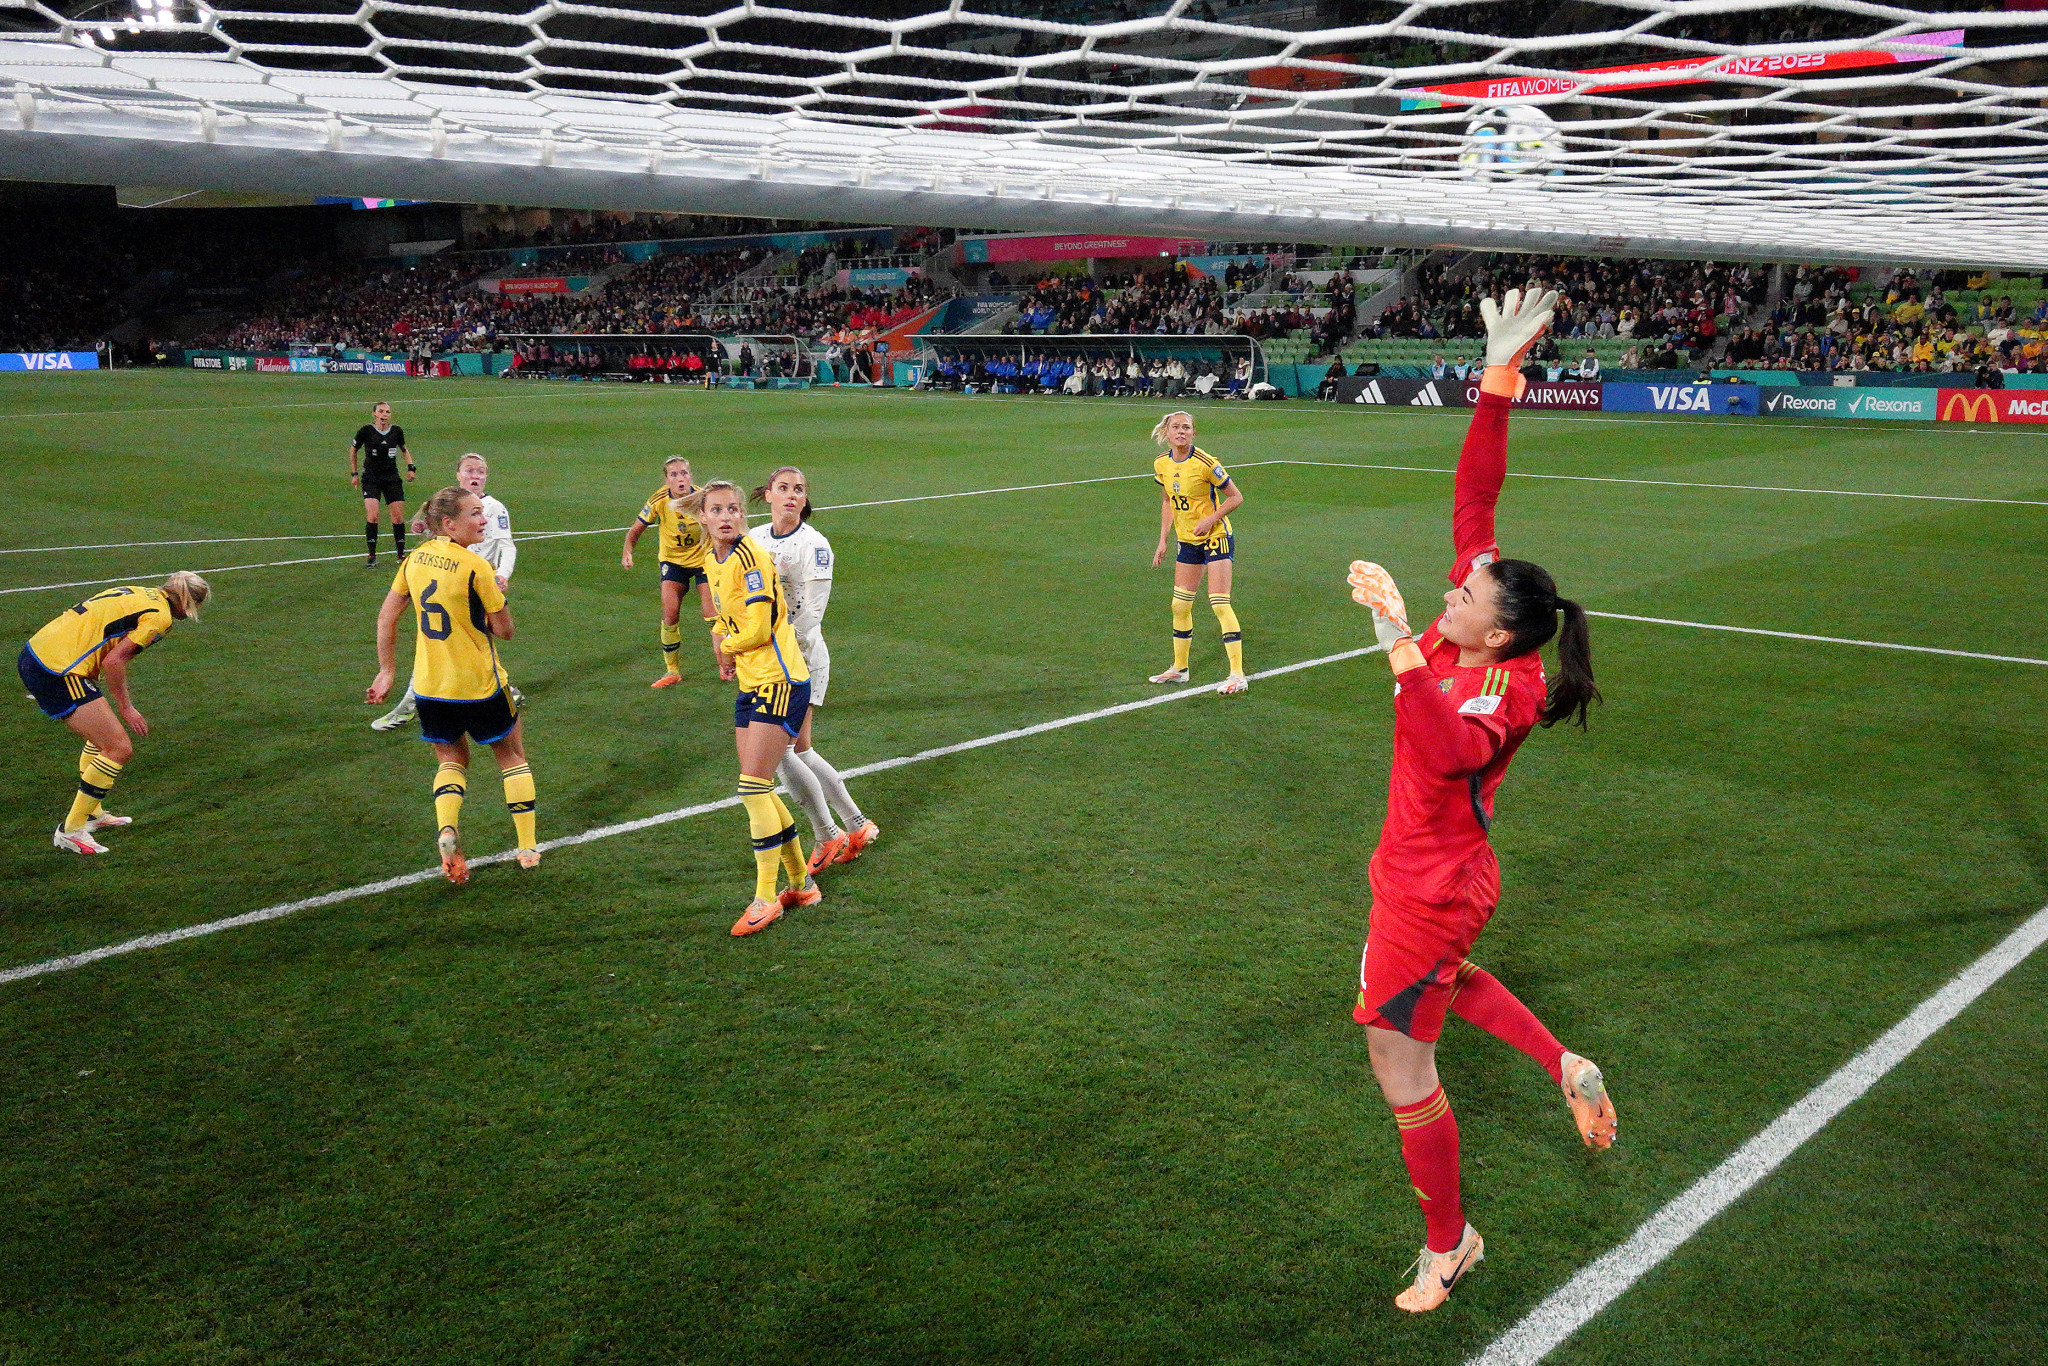 Zecira Musovic produced an inspiring goalkeeping performance for Sweden to keep the holders at bay during regular time ©Getty Images